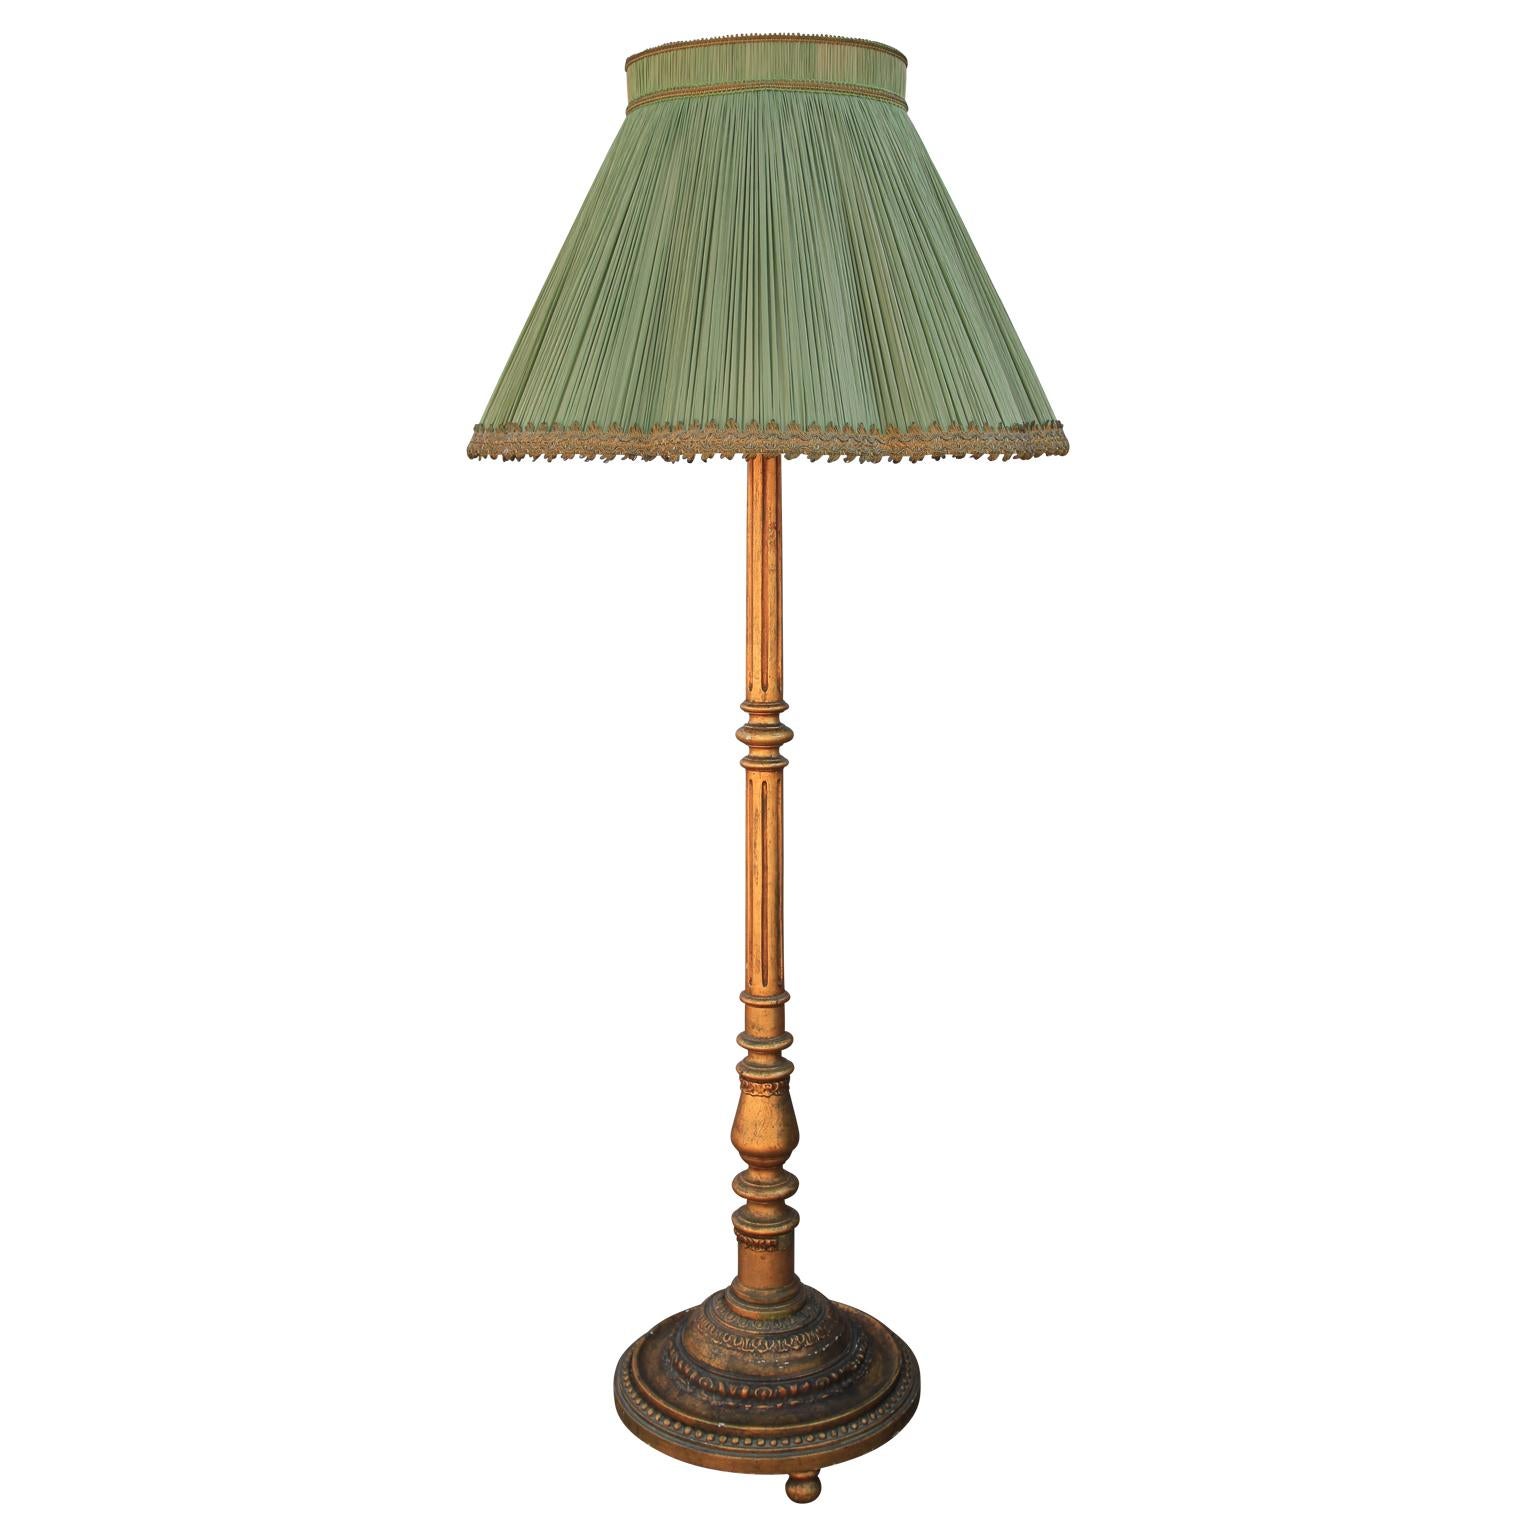 Fantastic French giltwood floor lamp with a wonderful green shade, circa early 20th century. Can be rewired if requested.

 Dimensions of shade: H 18 in. x W 29 in. x D 29 in.